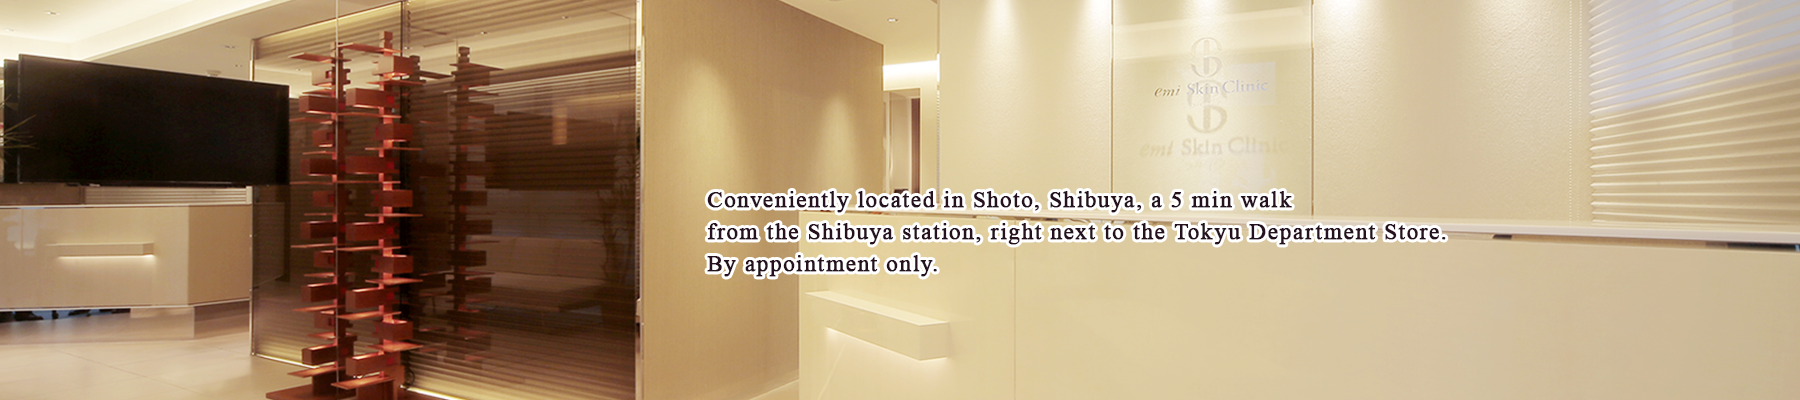 Conveniently located in Shoto, Shibuya, a 5 min walk from the Shibuya station, right next to the Tokyu Department Store. By appointment only.